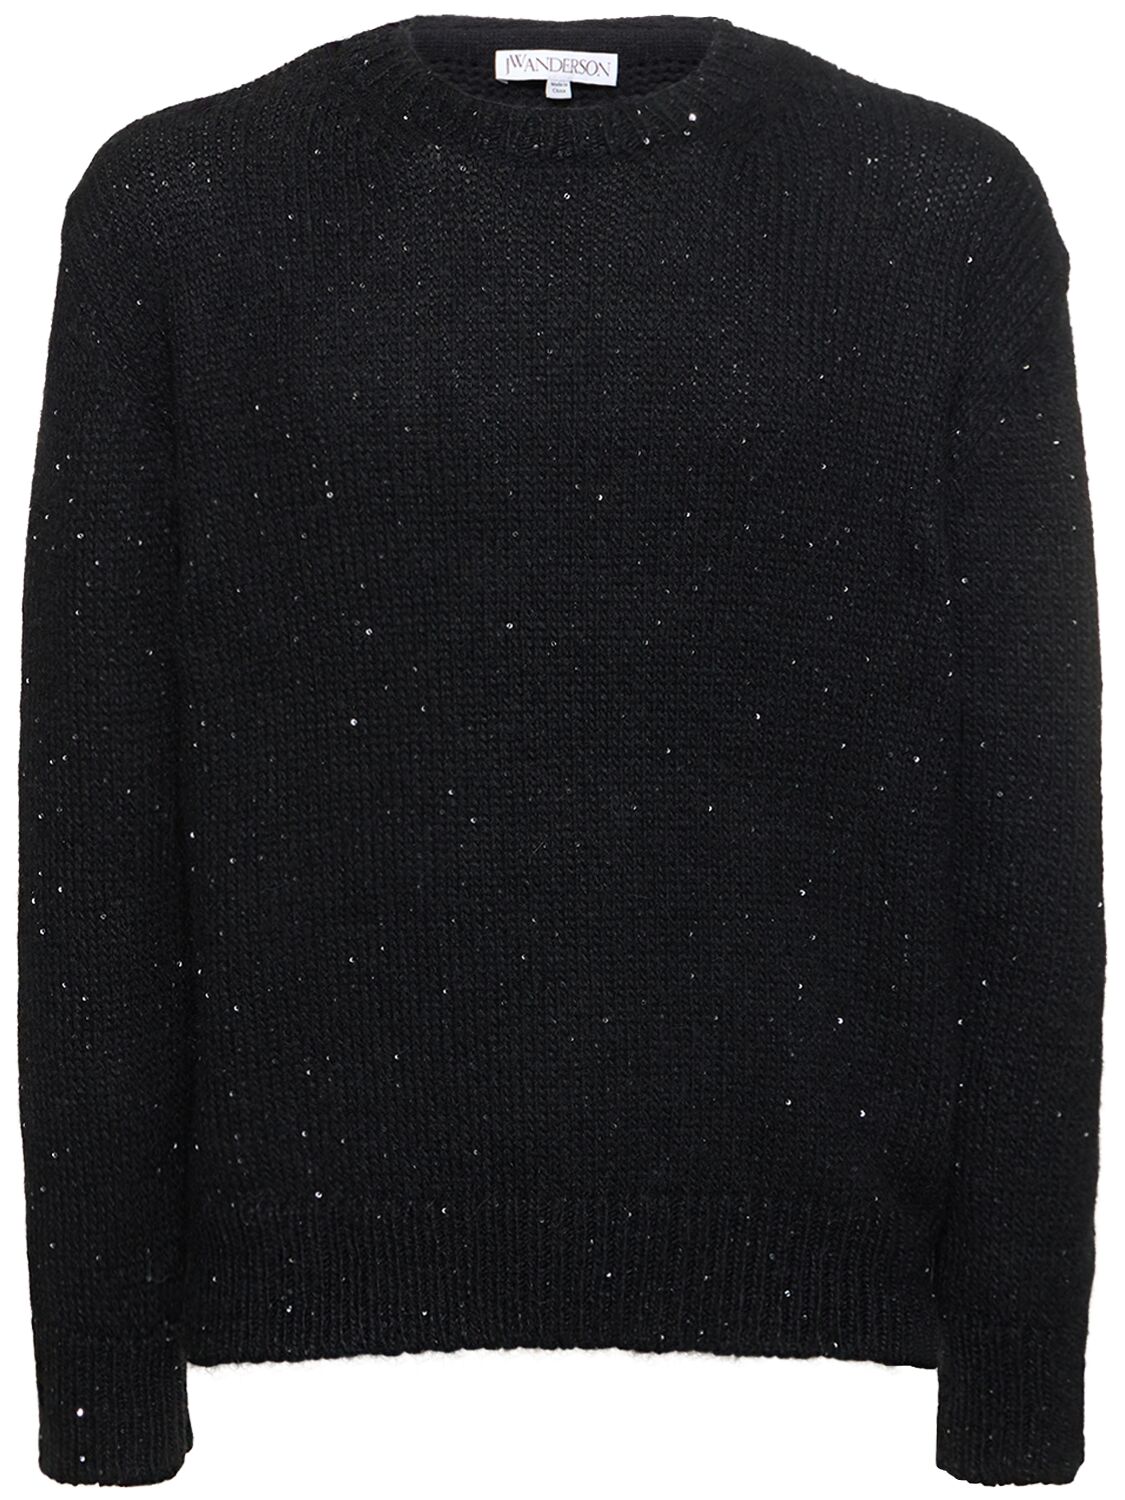 Sequined Sweater – MEN > CLOTHING > KNITWEAR